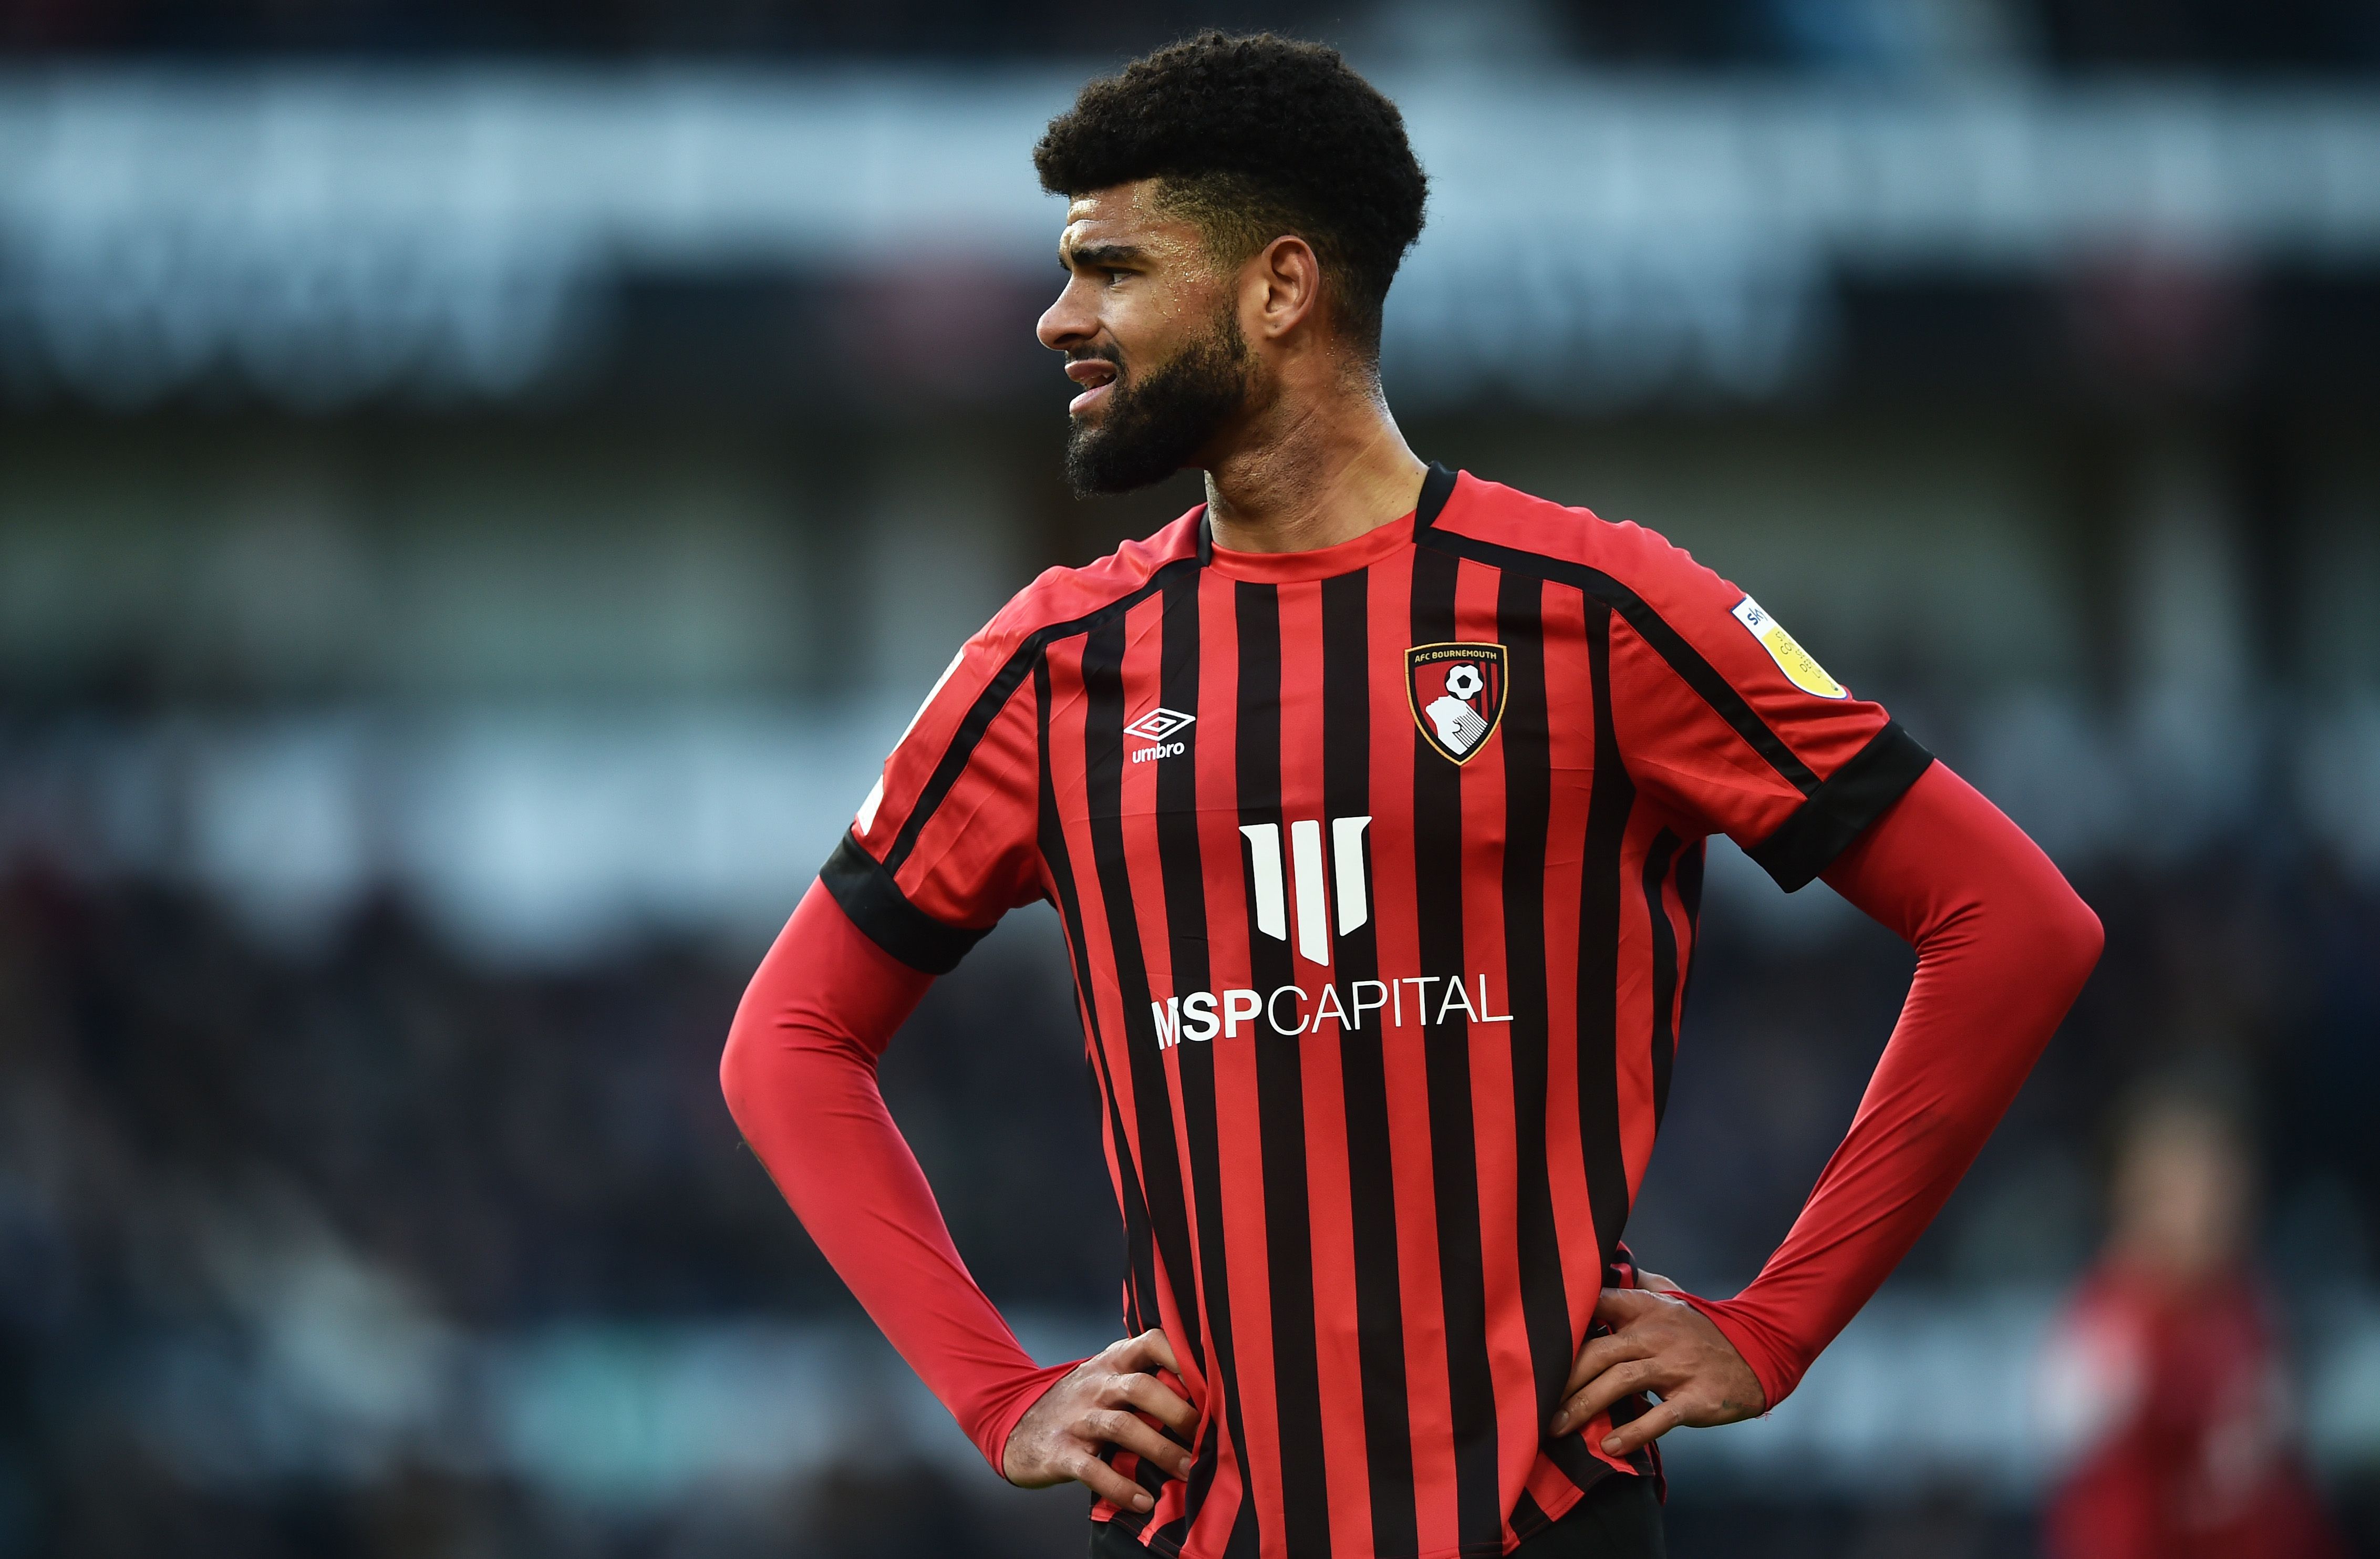 Billing returns to the Premier League with Bournemouth